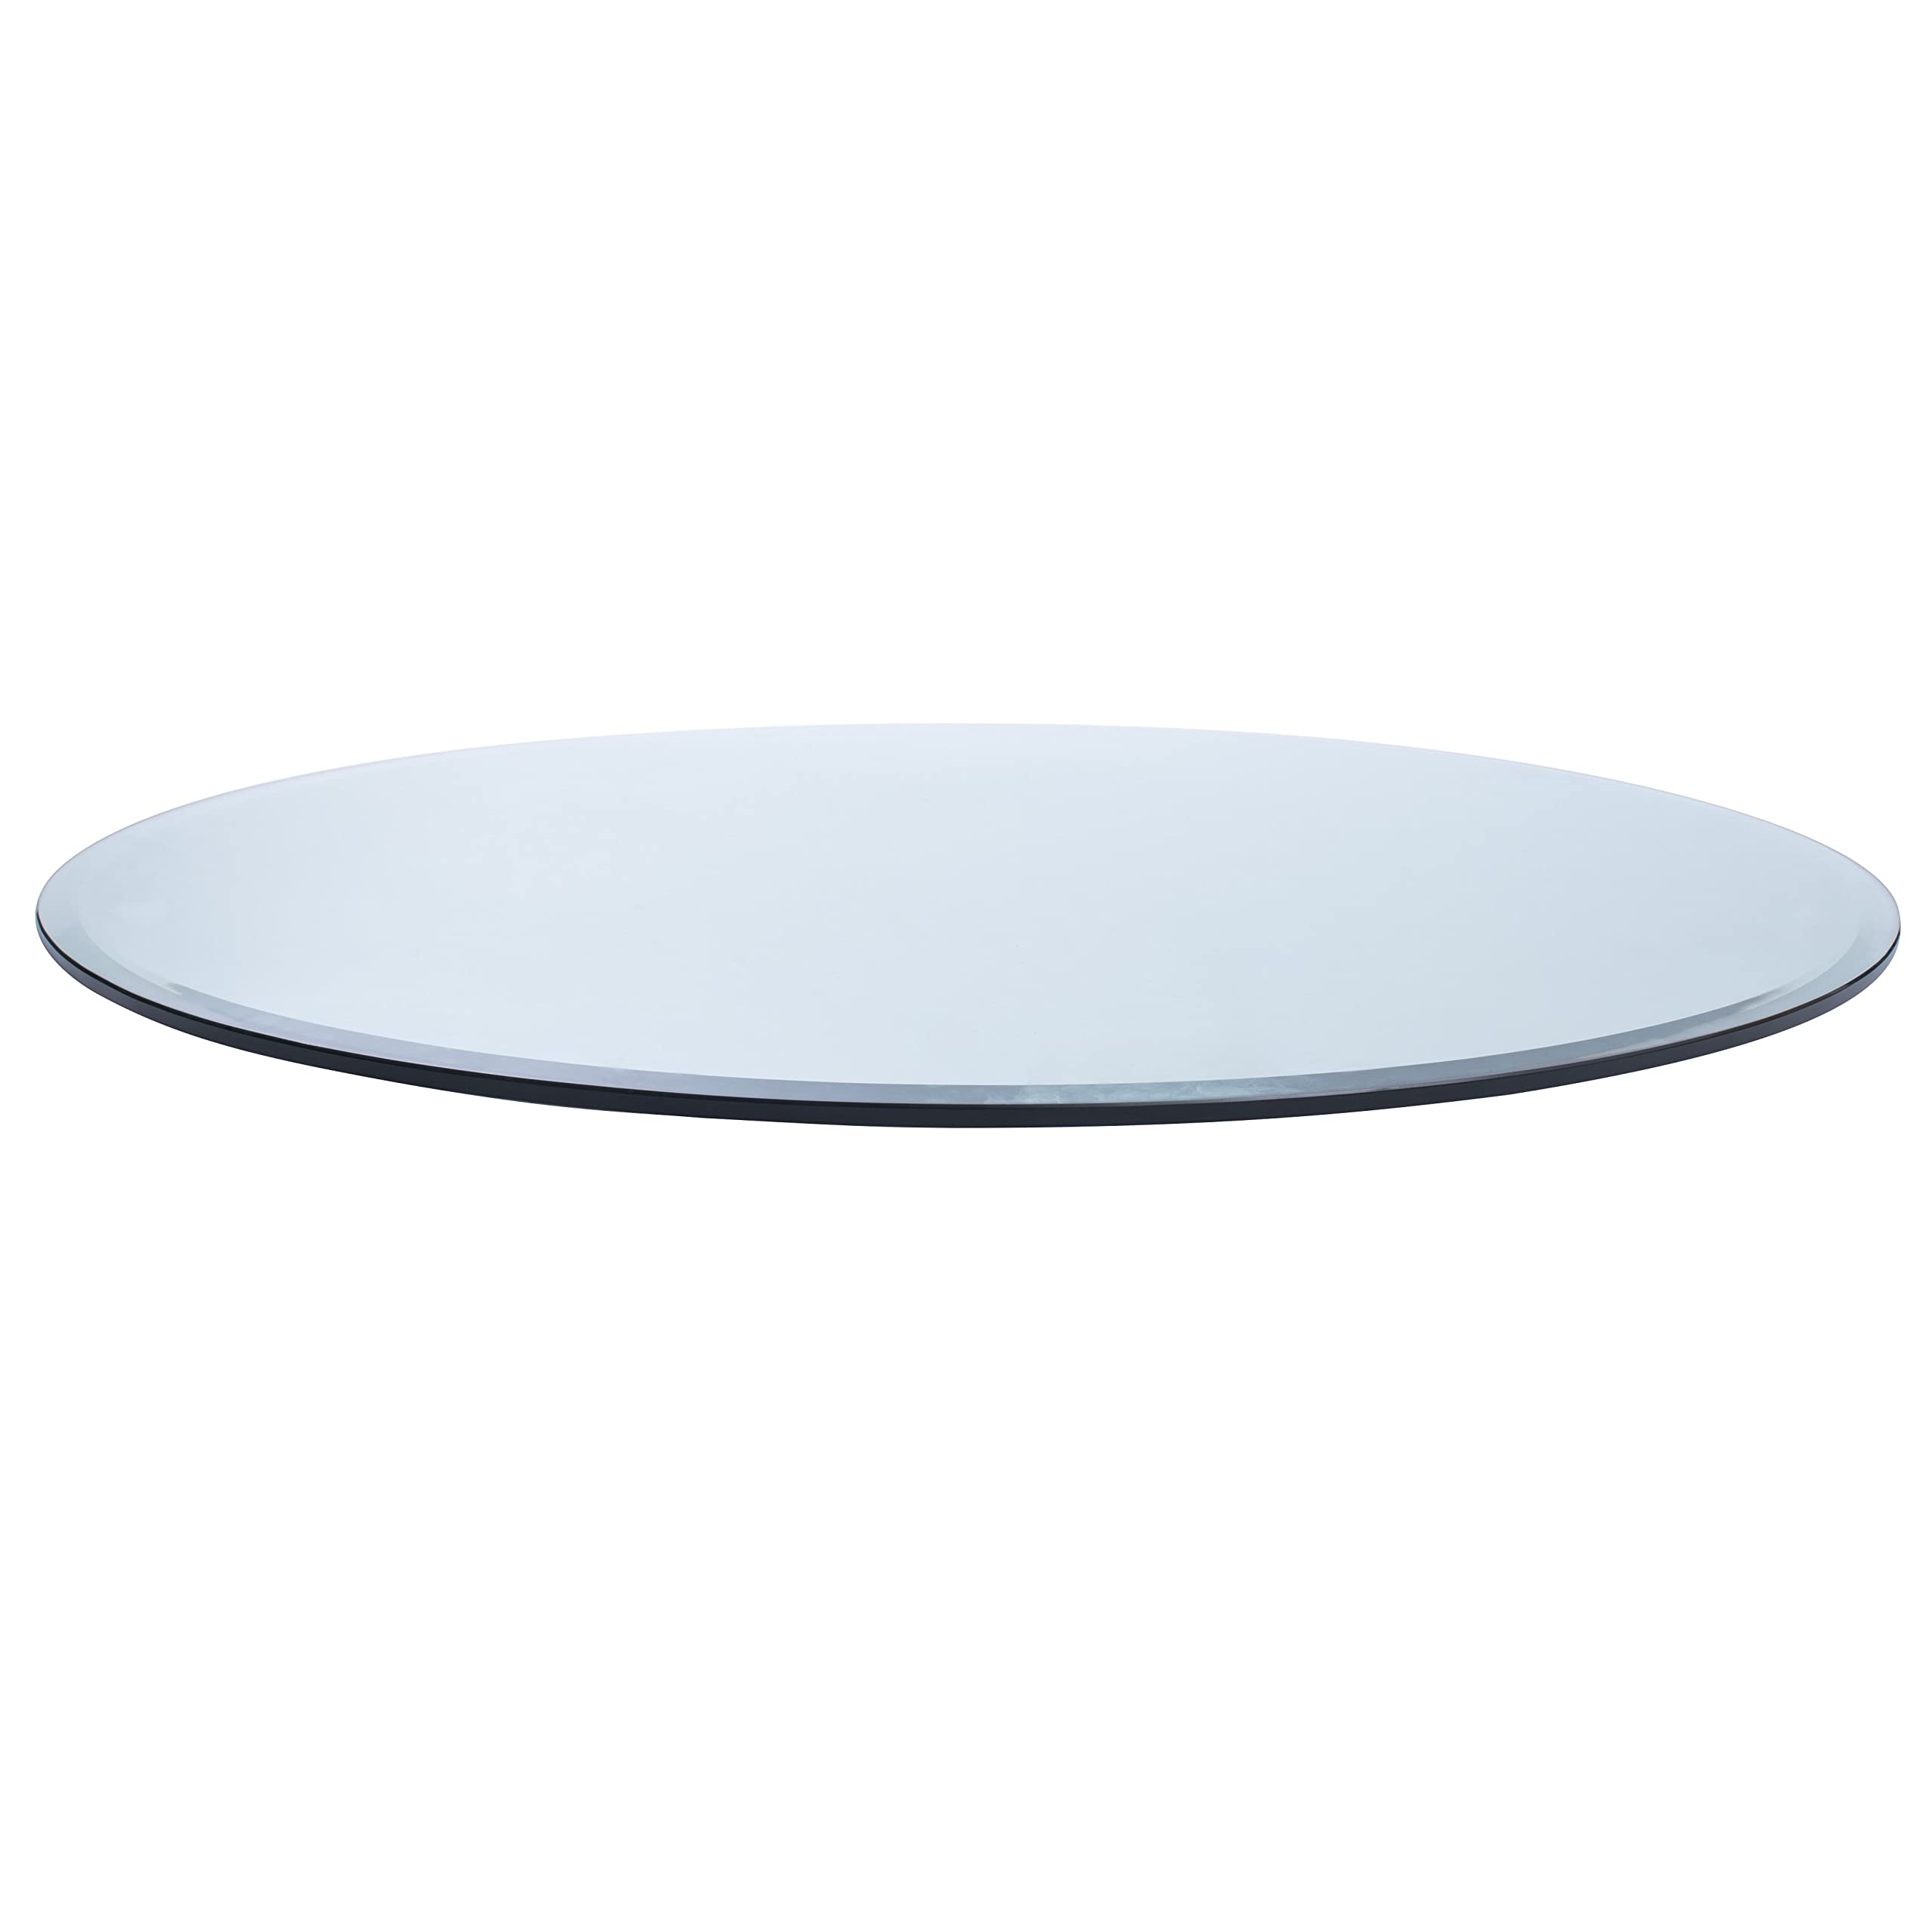 Spancraft 26" Round 1/4" Thick Tempered Clear Glass Table Top with Flat Polished Edge